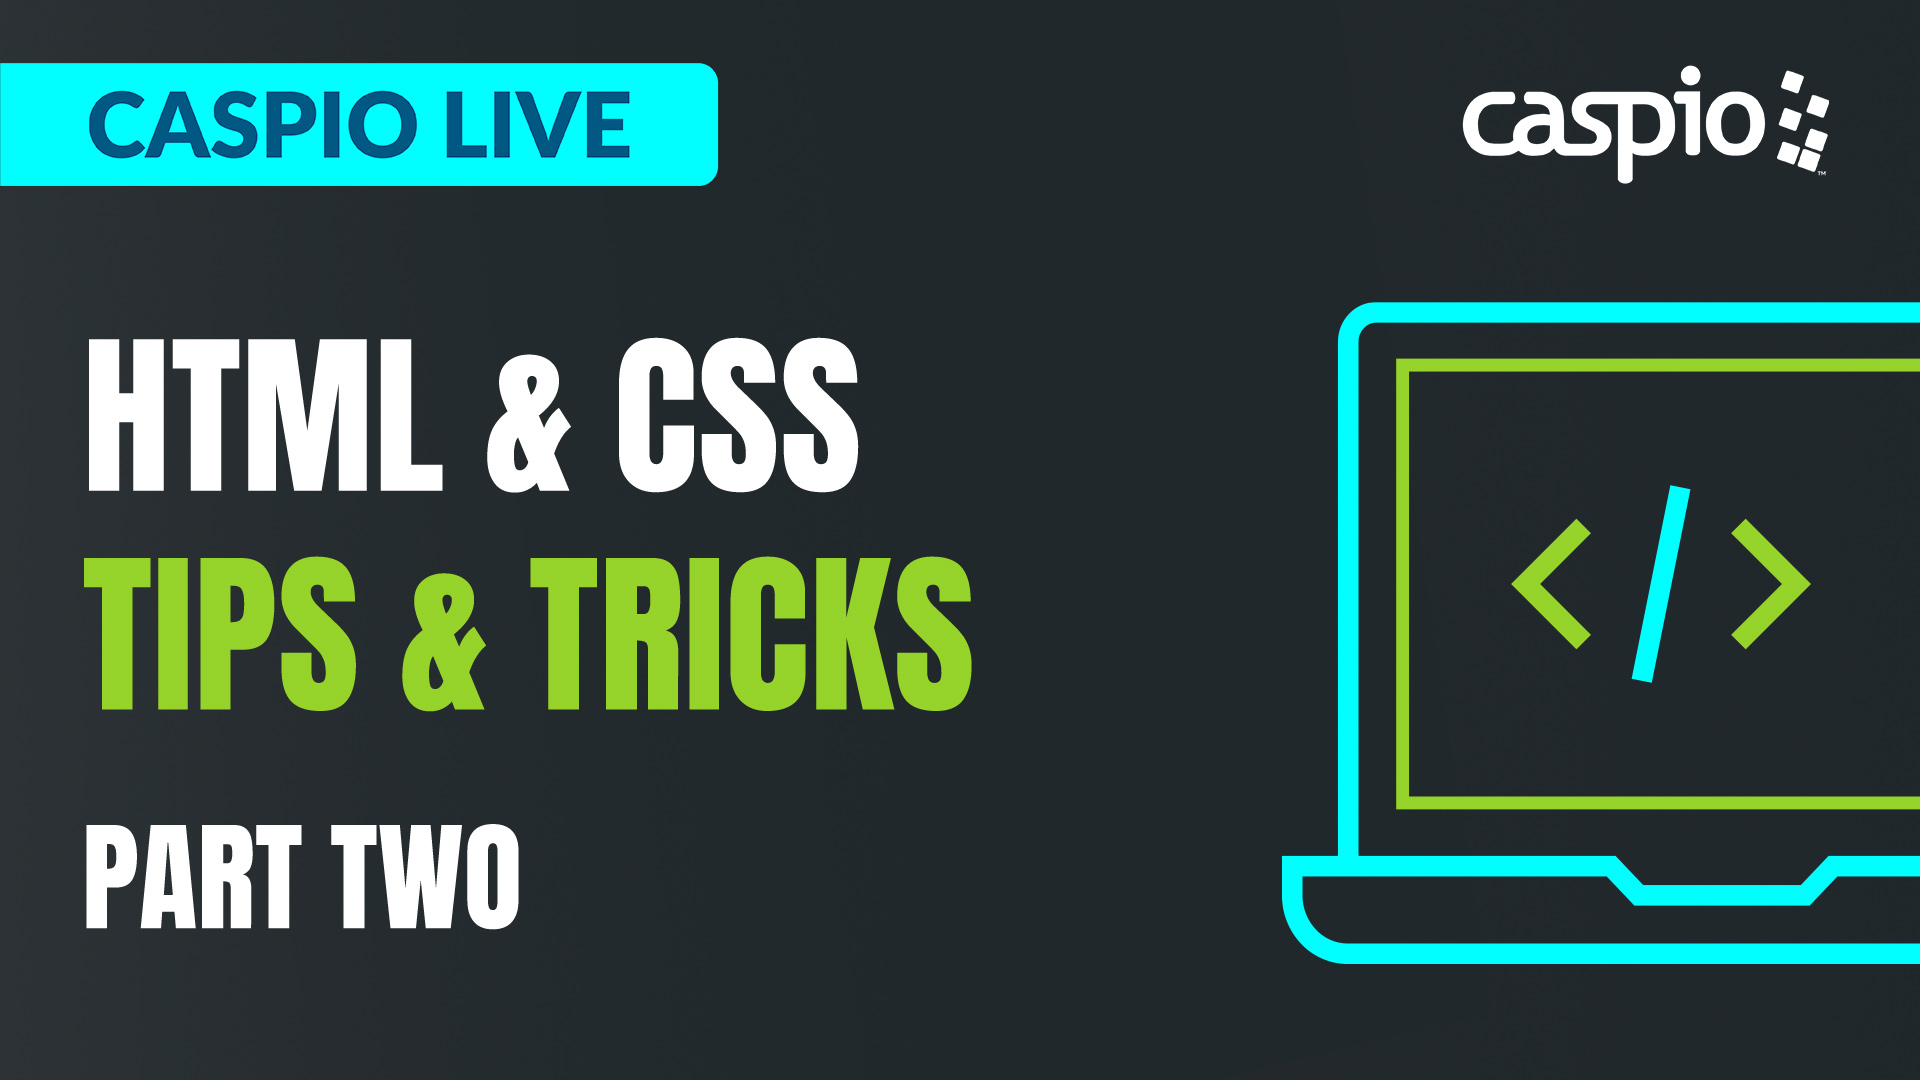 HTML & CSS Tips & Tricks Part Two